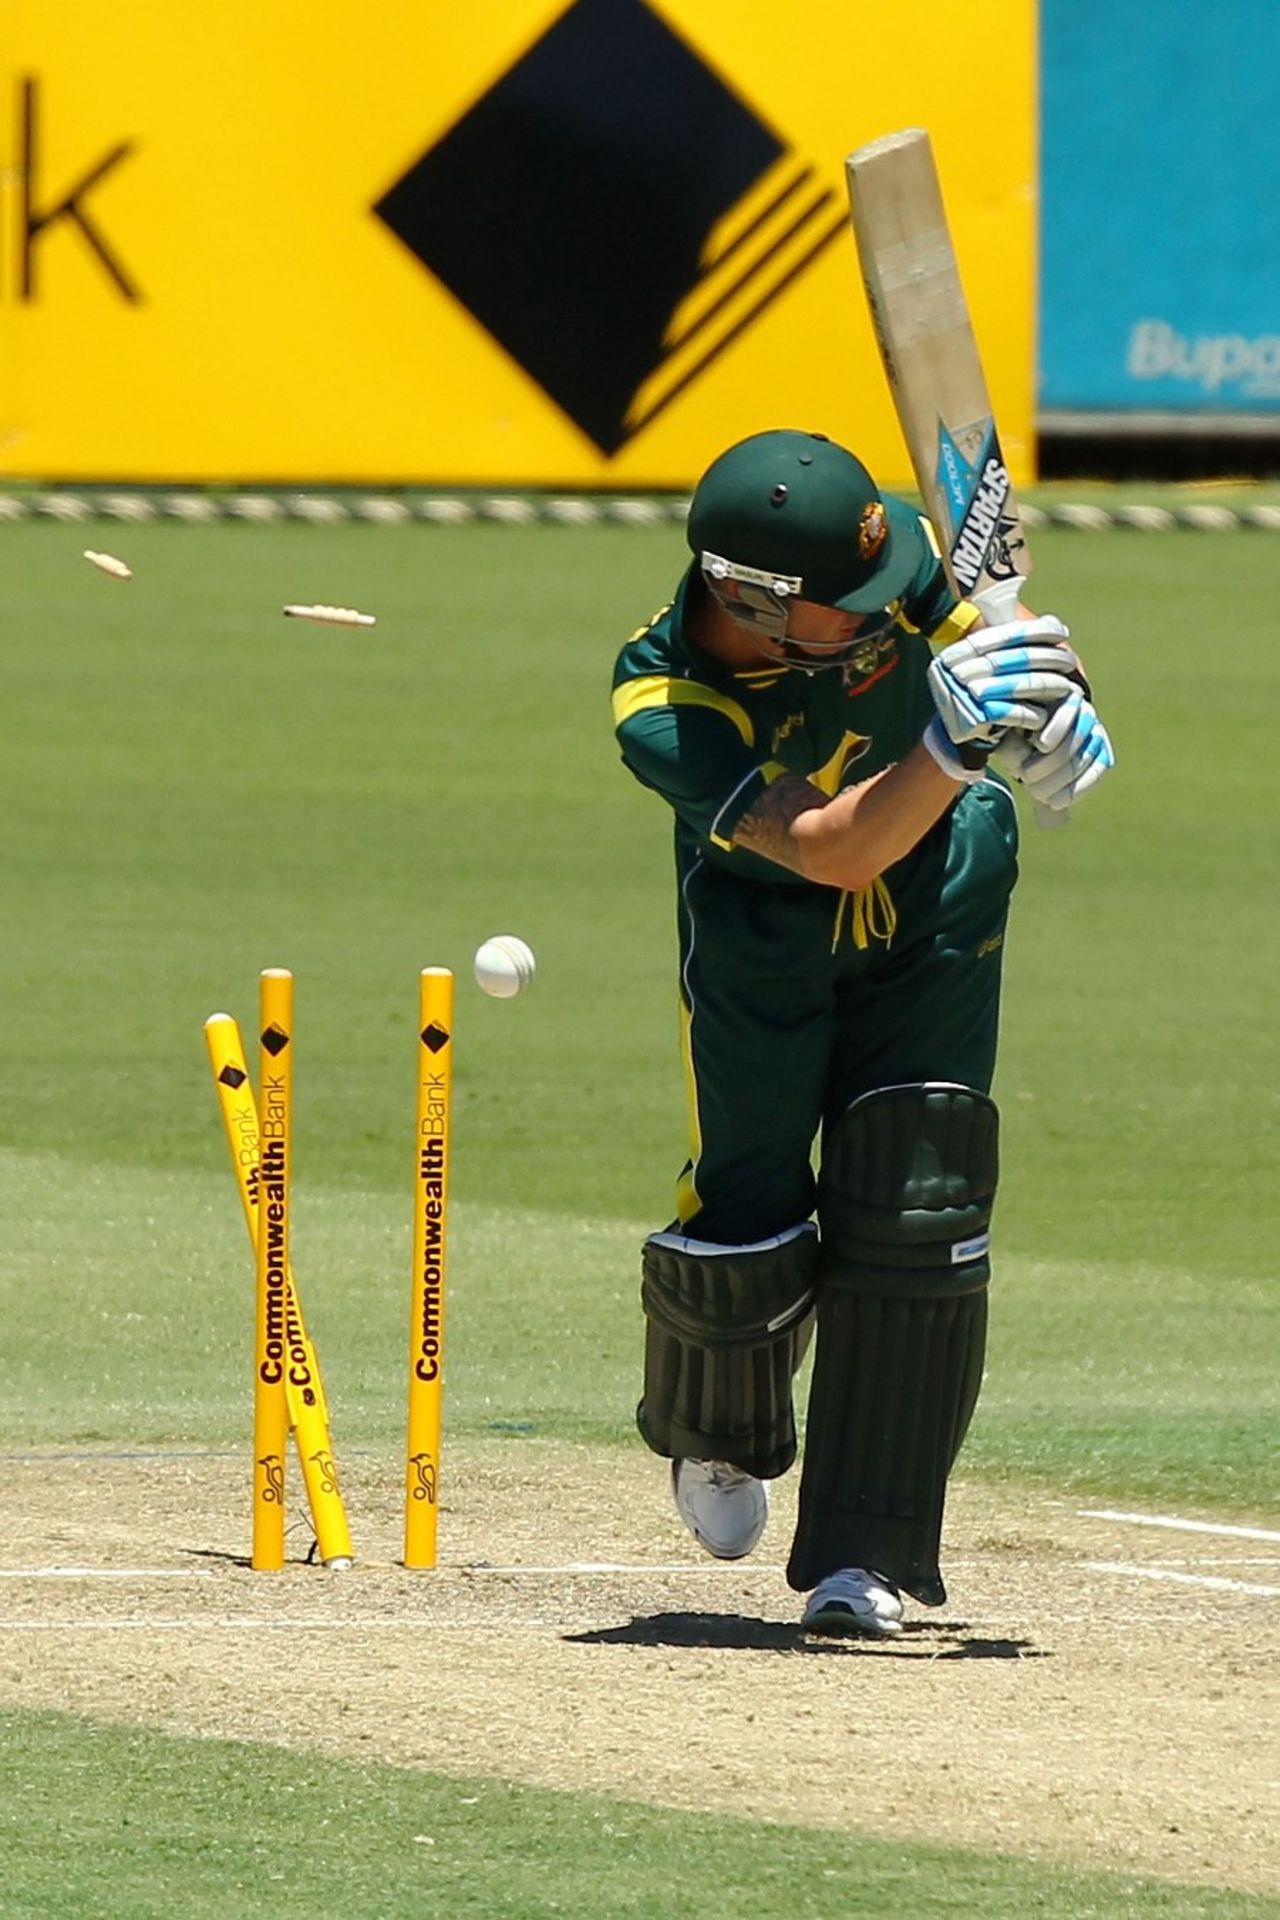 Michael Clarke's middle stump is knocked back, Australia v West Indies, 2nd ODI, Perth, February 3, 2013